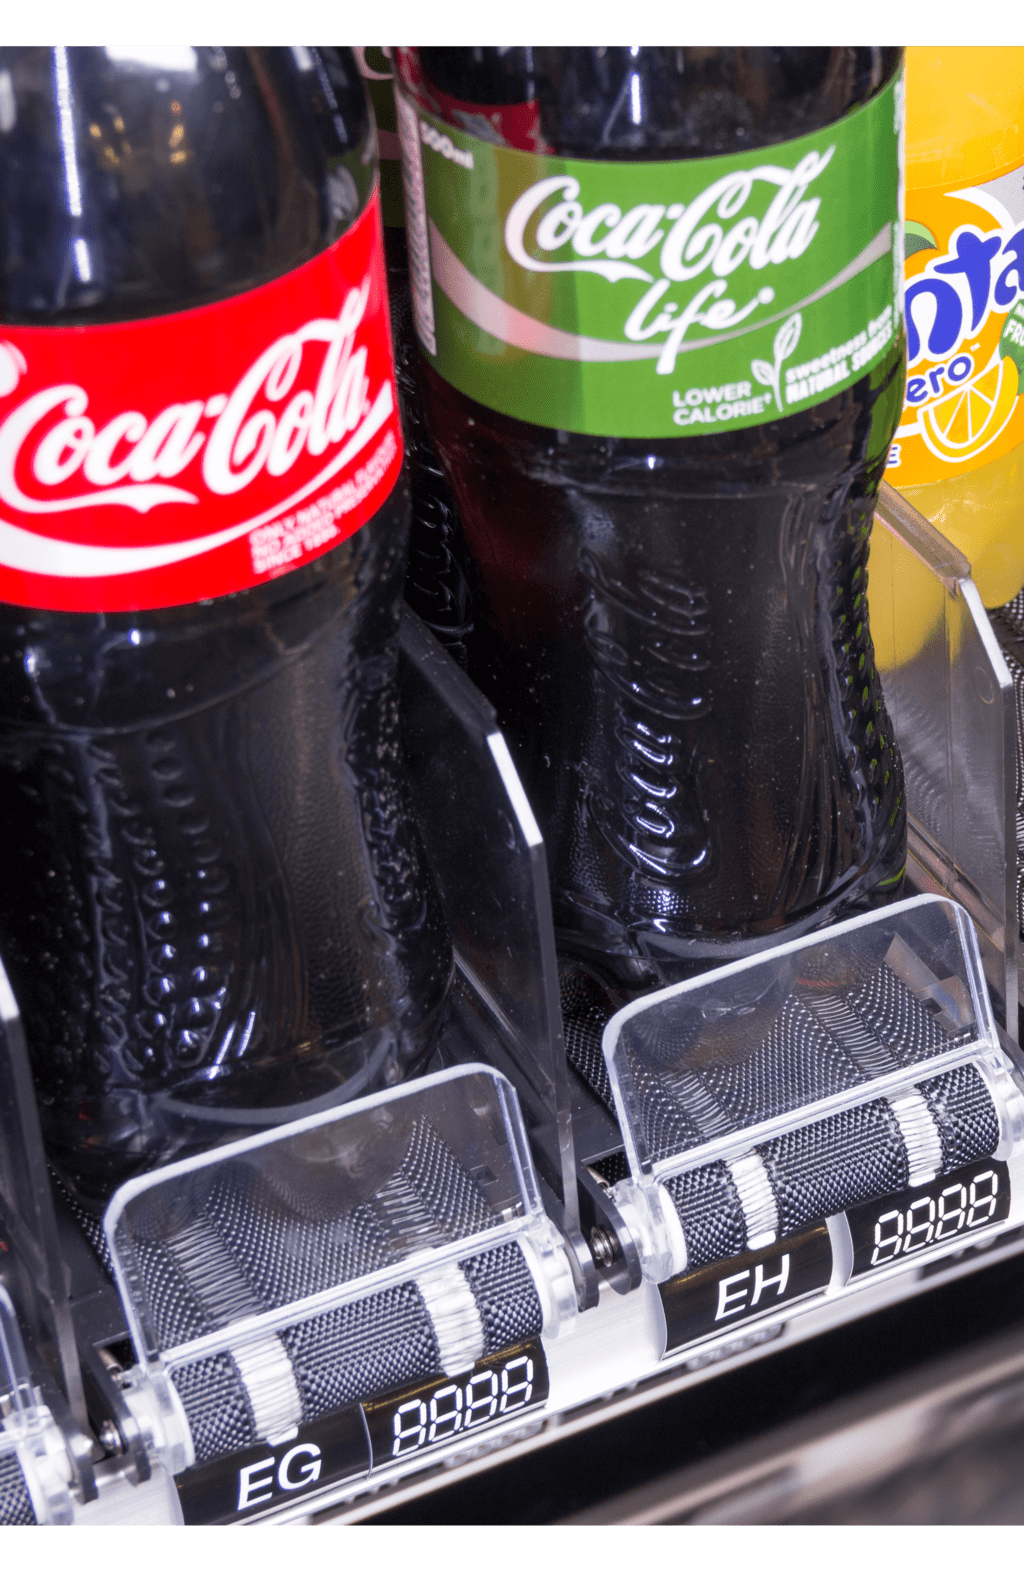 Installers Of Drinks Vending Machines For Colleges Corby